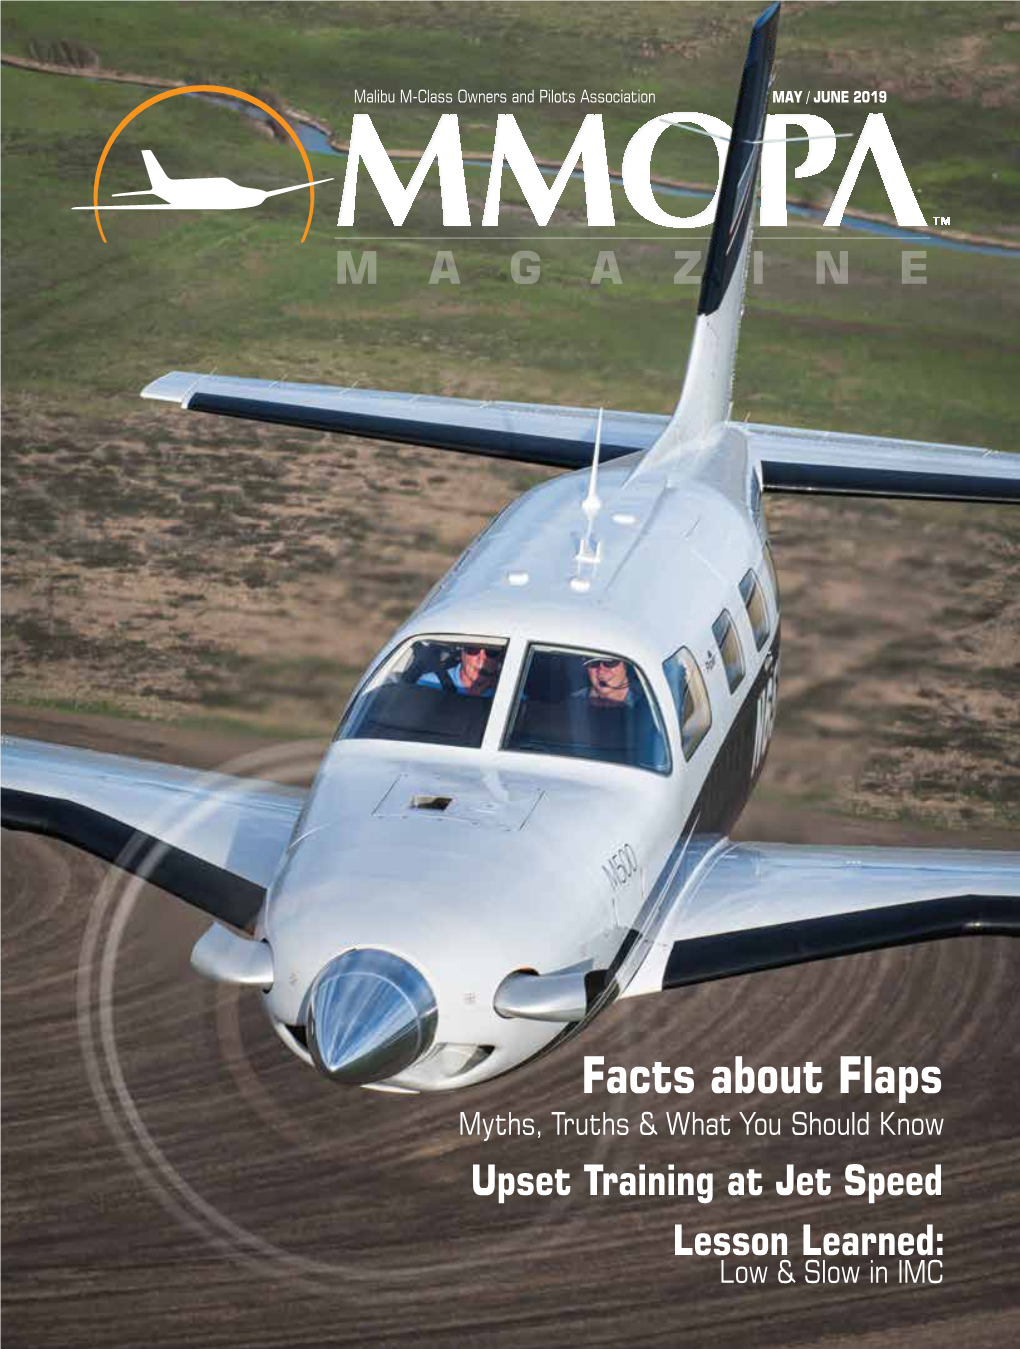 Facts About Flaps Myths, Truths & What You Should Know Upset Training at Jet Speed Lesson Learned: Low & Slow in IMC Legacy Flight Training